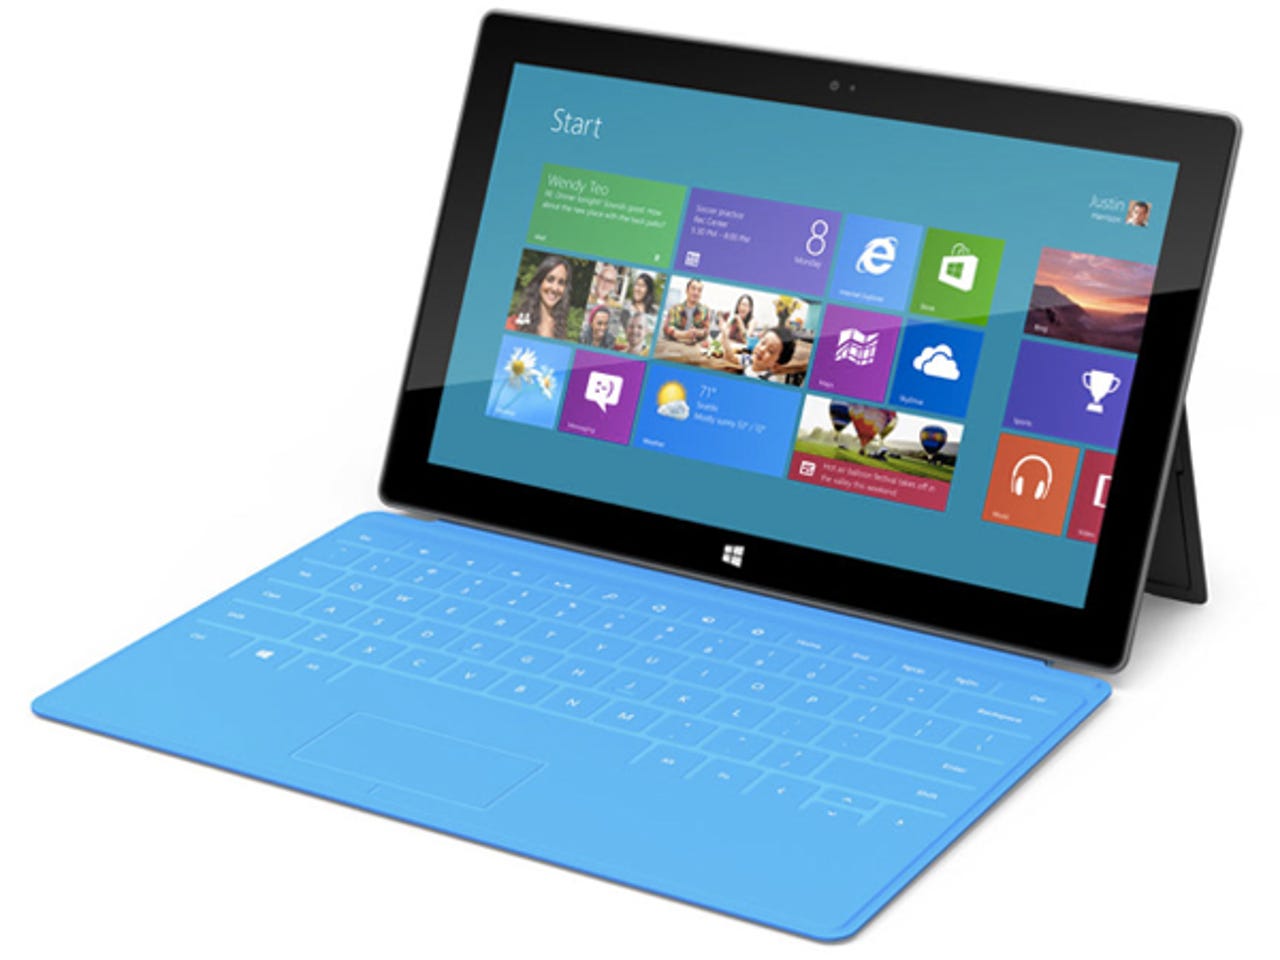 Surface? Apple's got nothing to worry about - Jason O'Grady